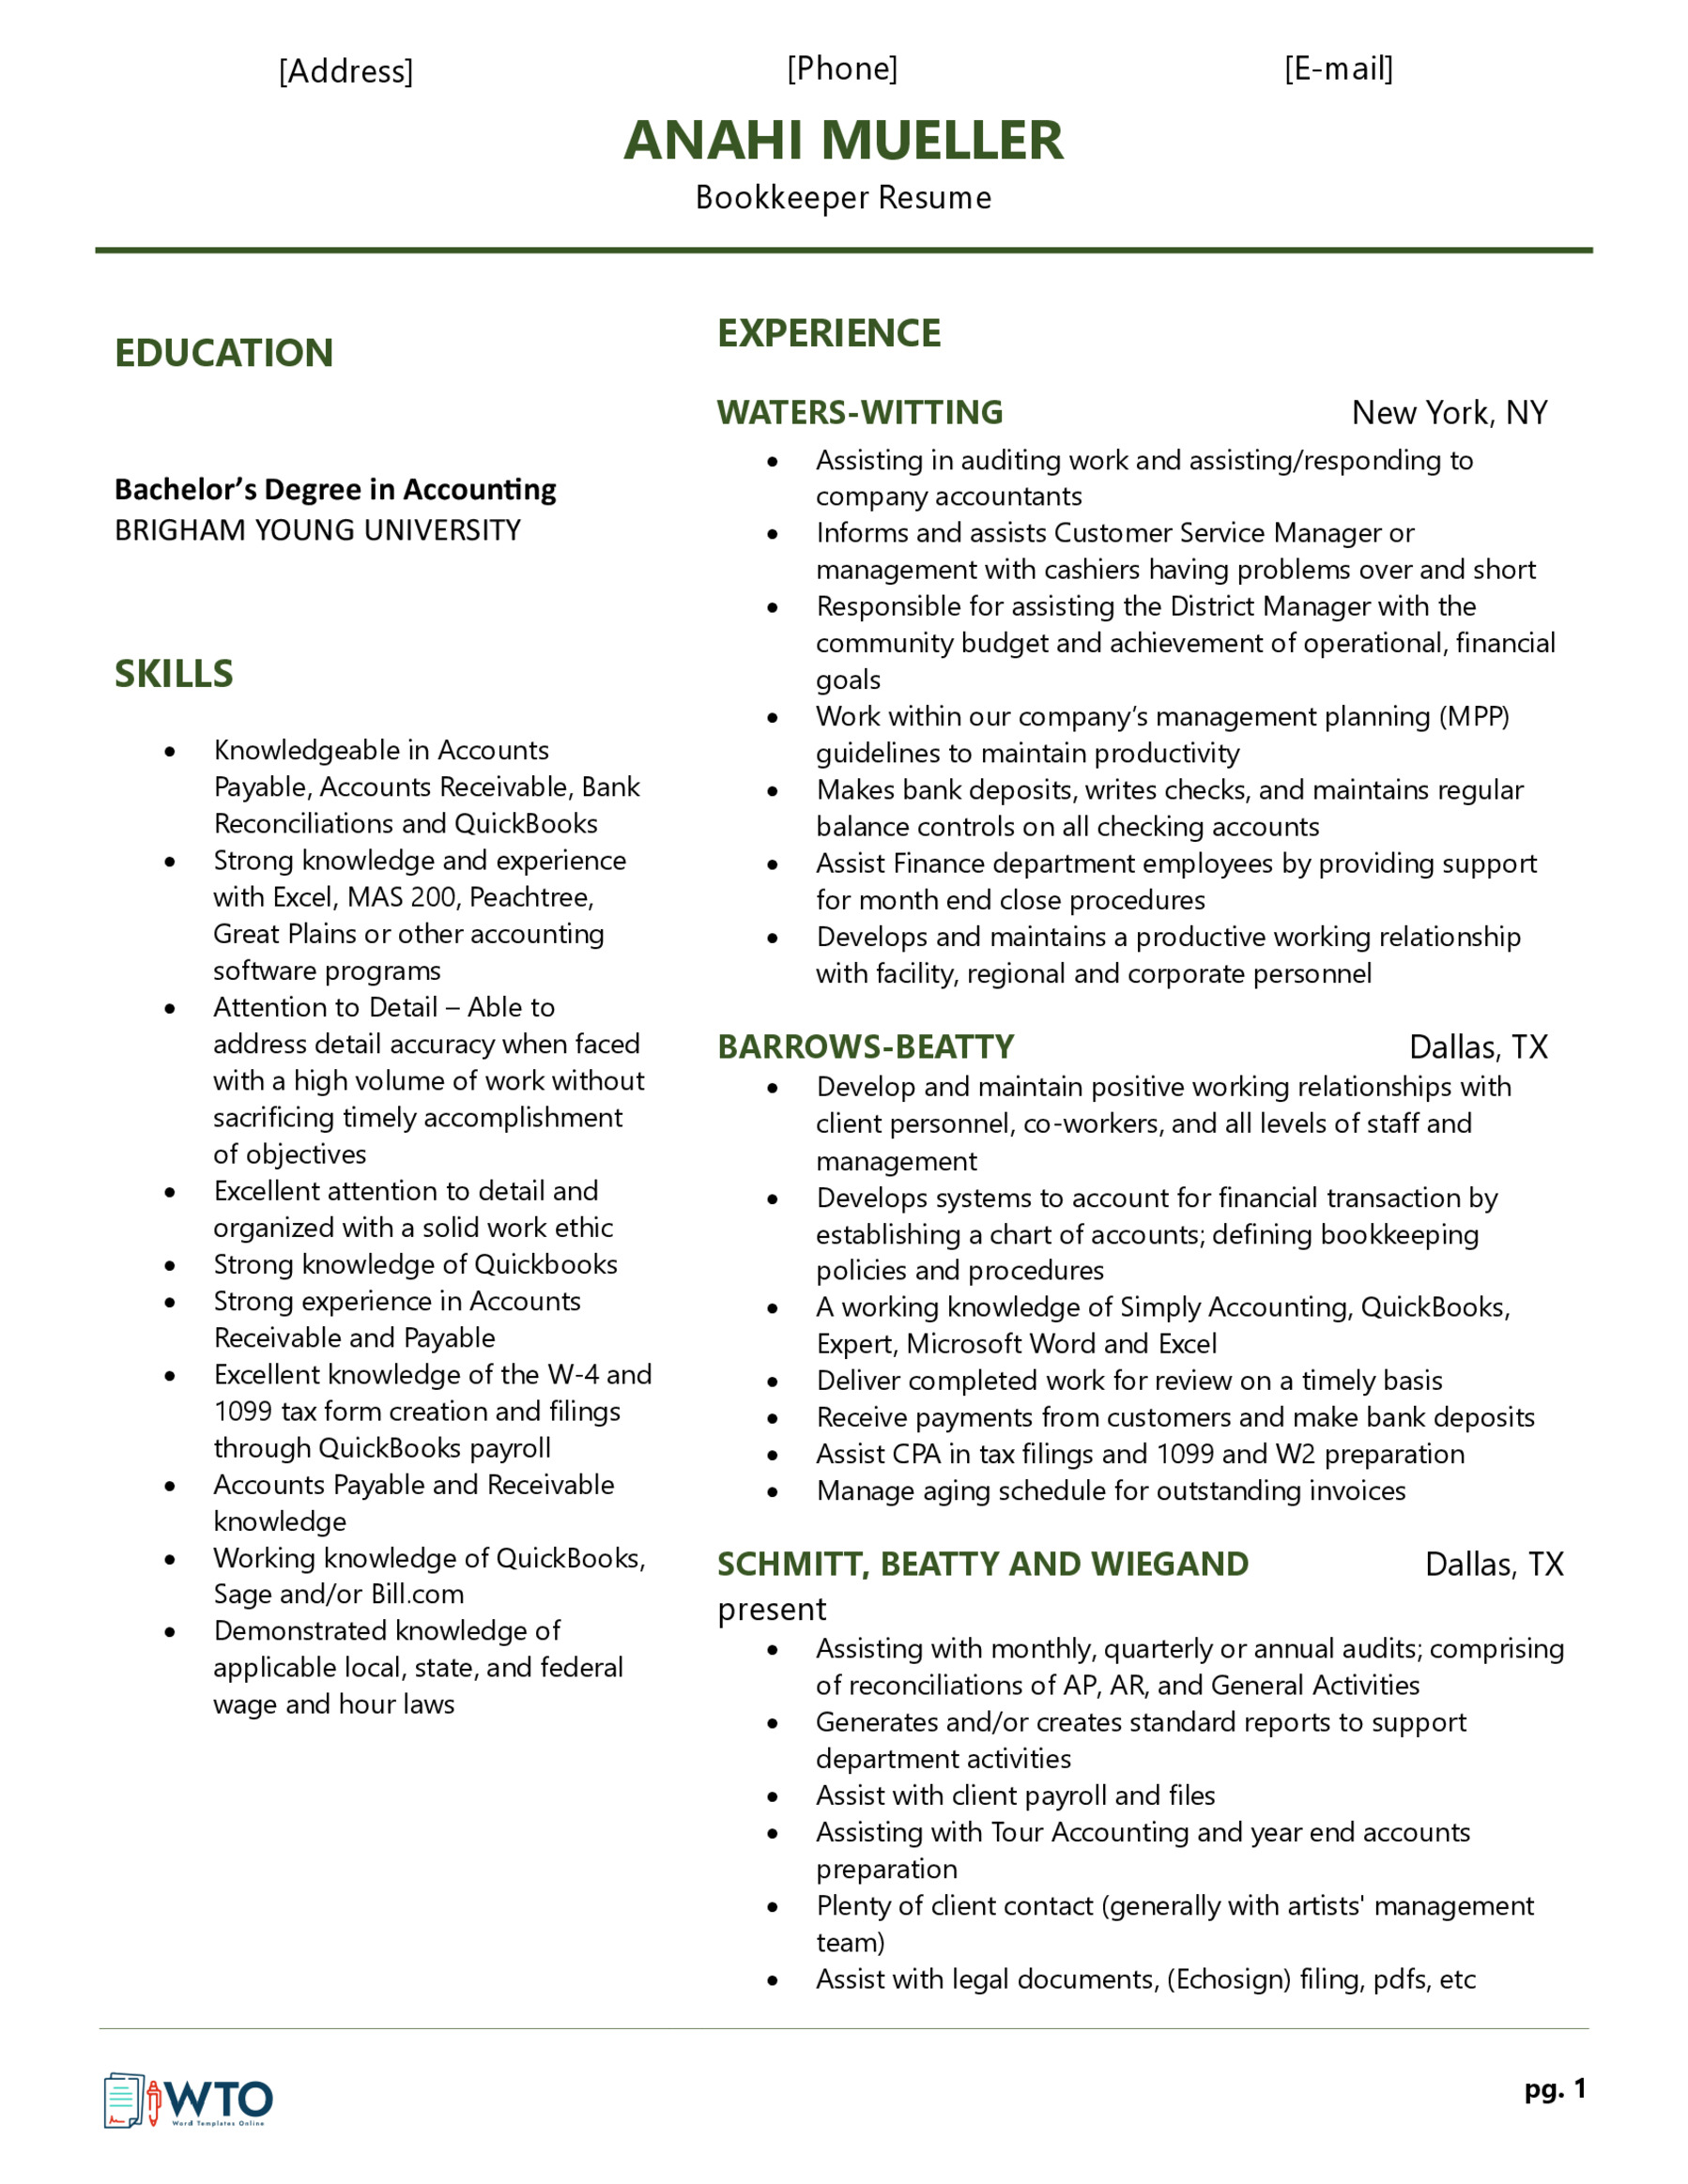 Bookkeeper Resume Example - Professional Sample